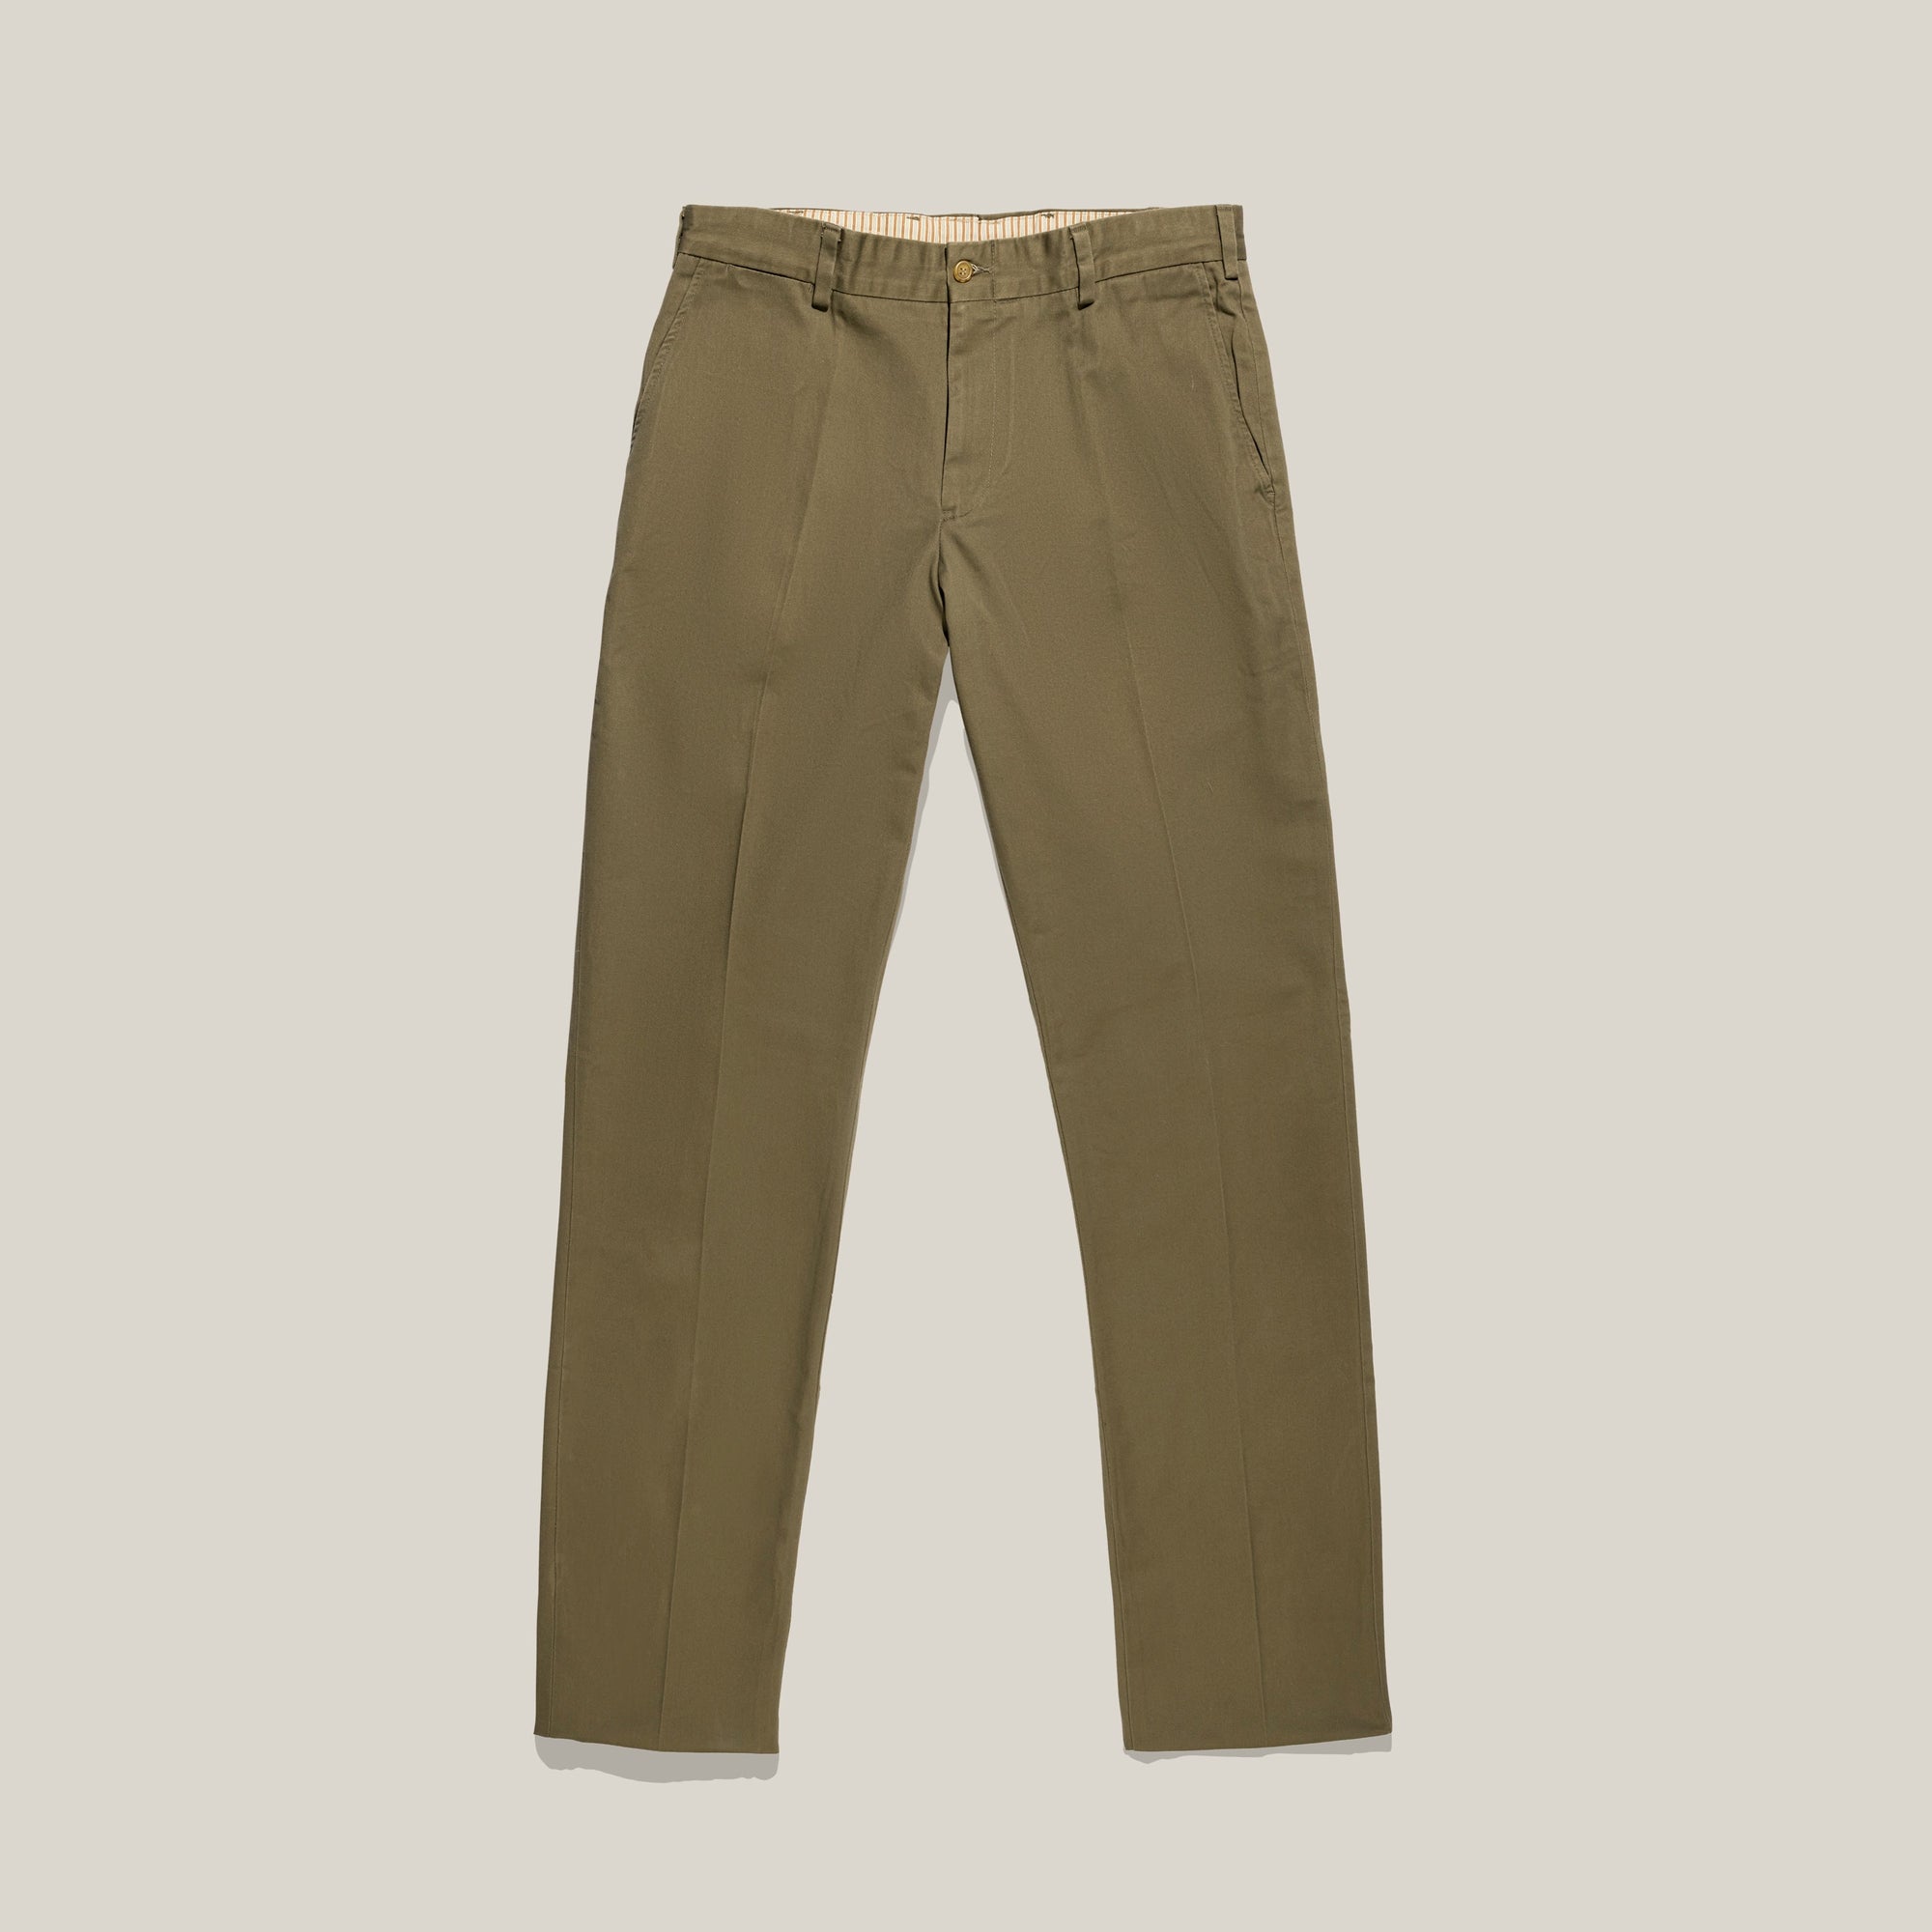 M3 Straight Fit Vintage Twills in Olive (Size 31 x 28) by Bills Khakis